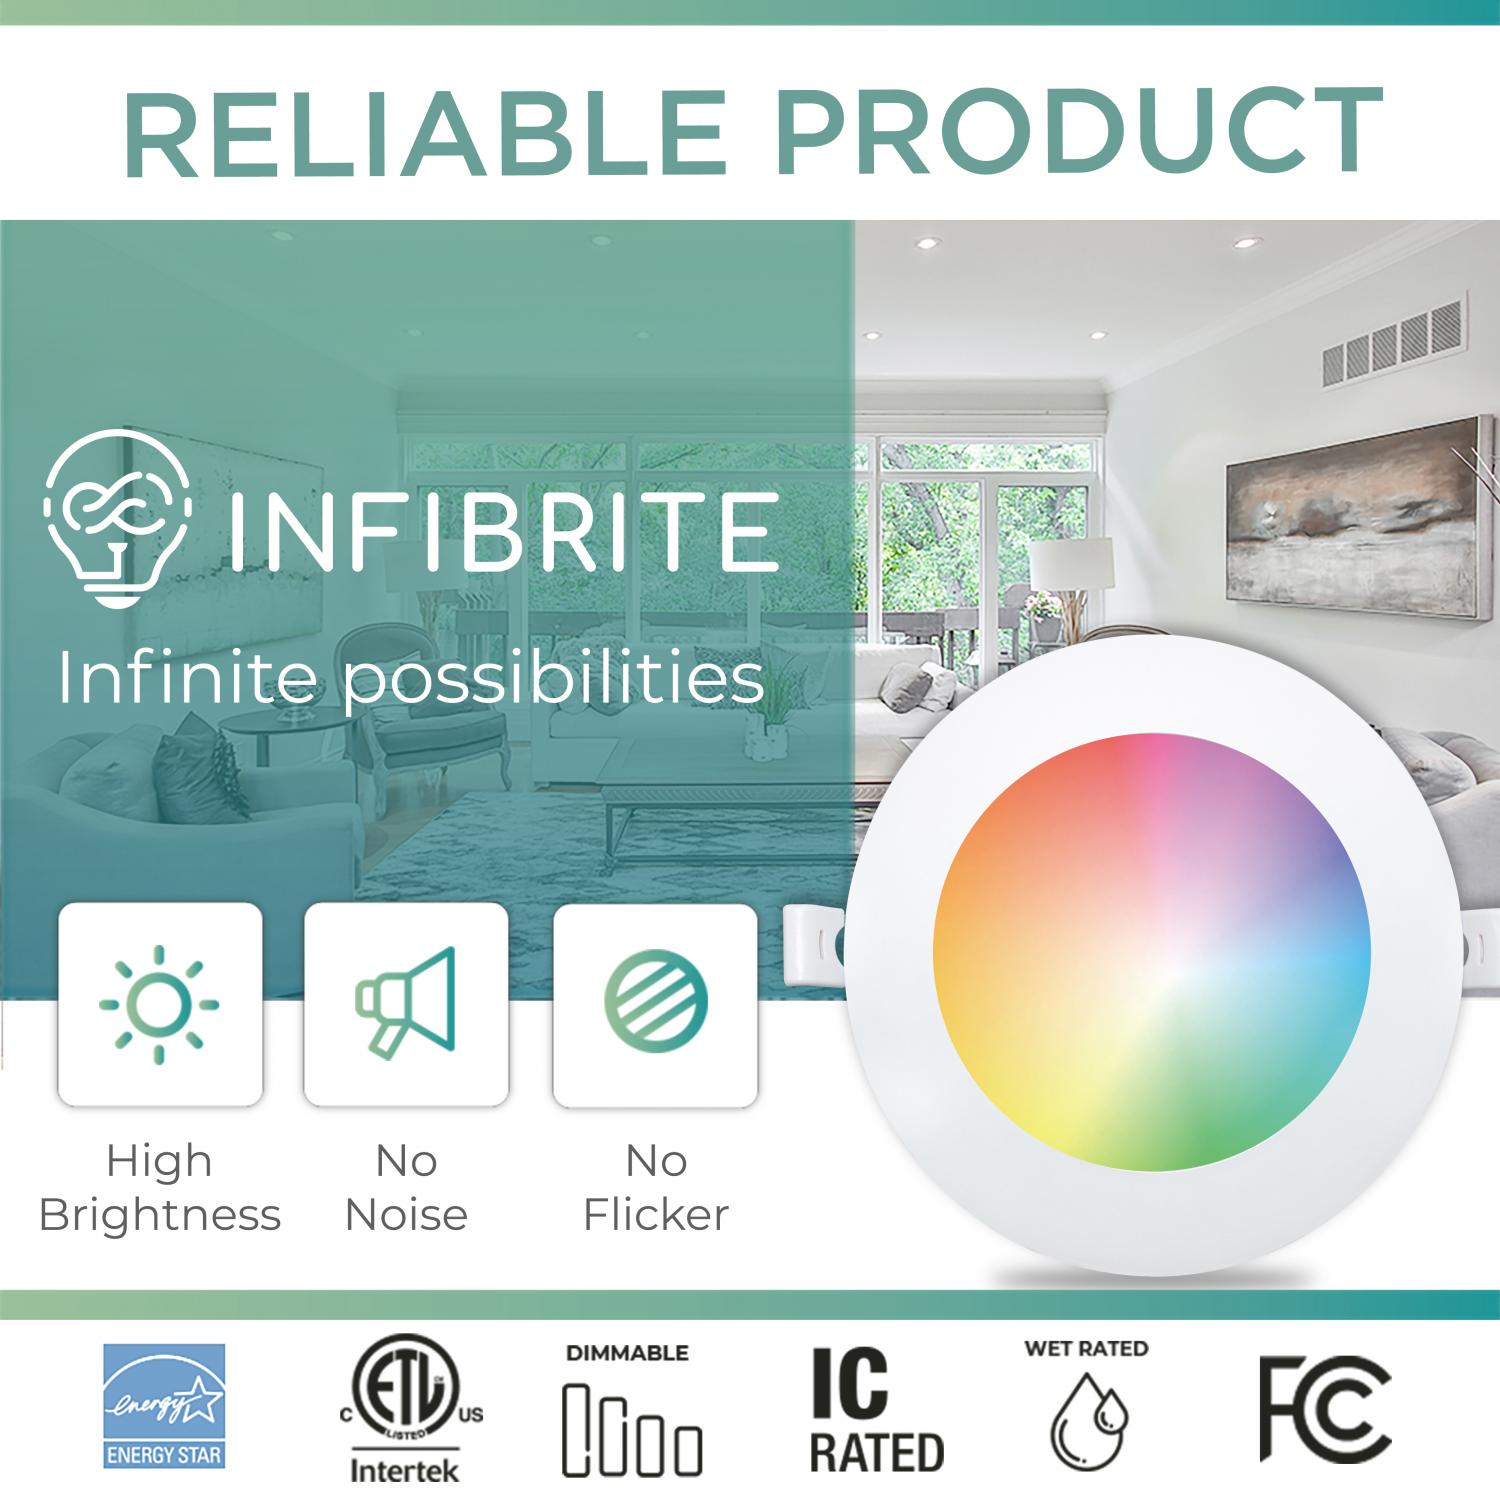 Infibrite 4 Inch Wifi Smart Ultra-Slim LED Ceiling Mount Recessed Light 9W 810LM Dimmable Retrofit with Junction Box, Easy Install, App & Voice Control, Alexa/Google Compatible, ETL & Energy Star, Wet Rated (24 Pack)